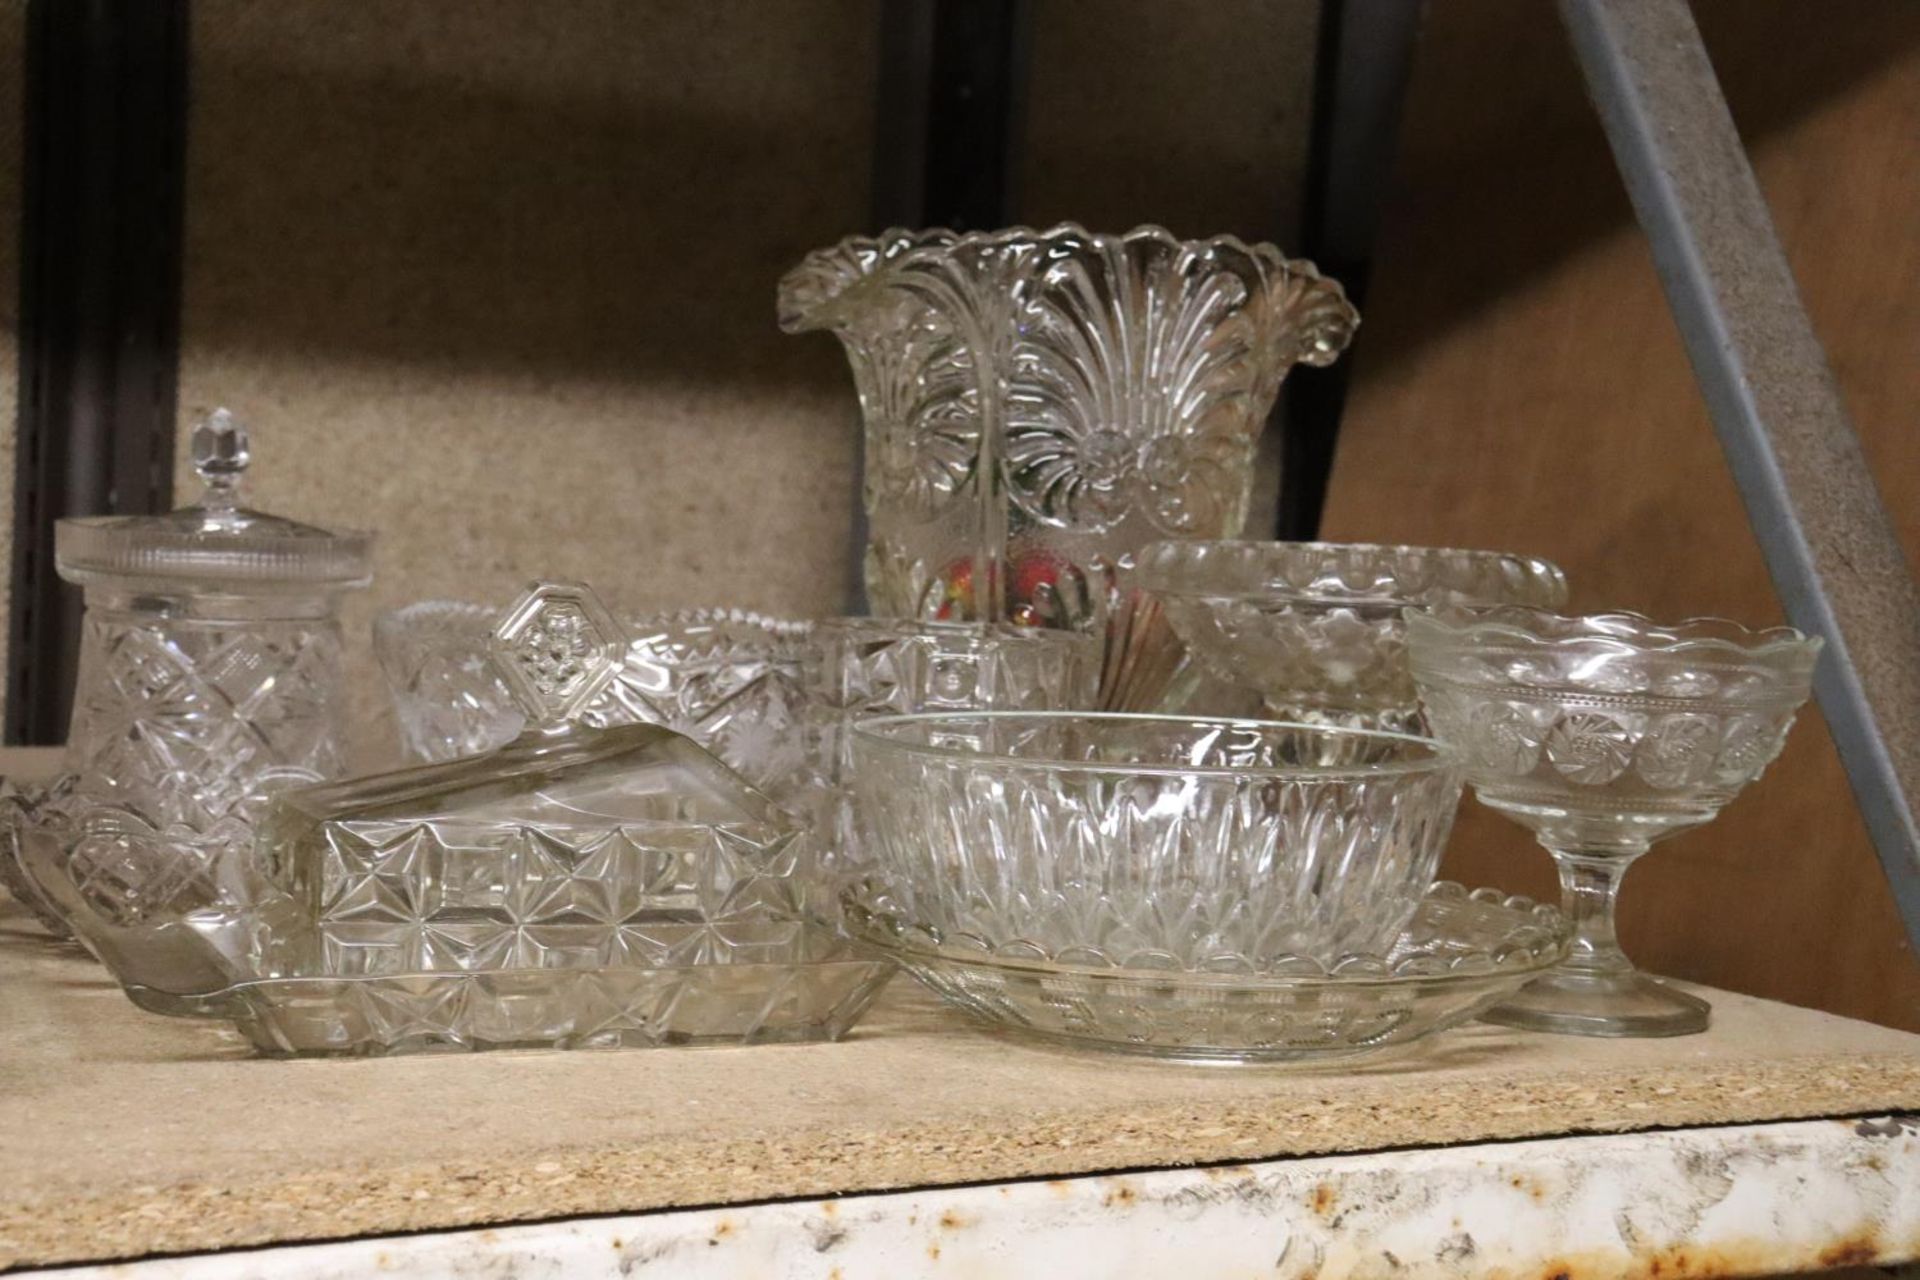 A QUANTITY OF GLASSWARE TO INCLUDE A LARGE VASE, BOWLS, FOOTED BOWLS, A CHEESE DISH, ETC